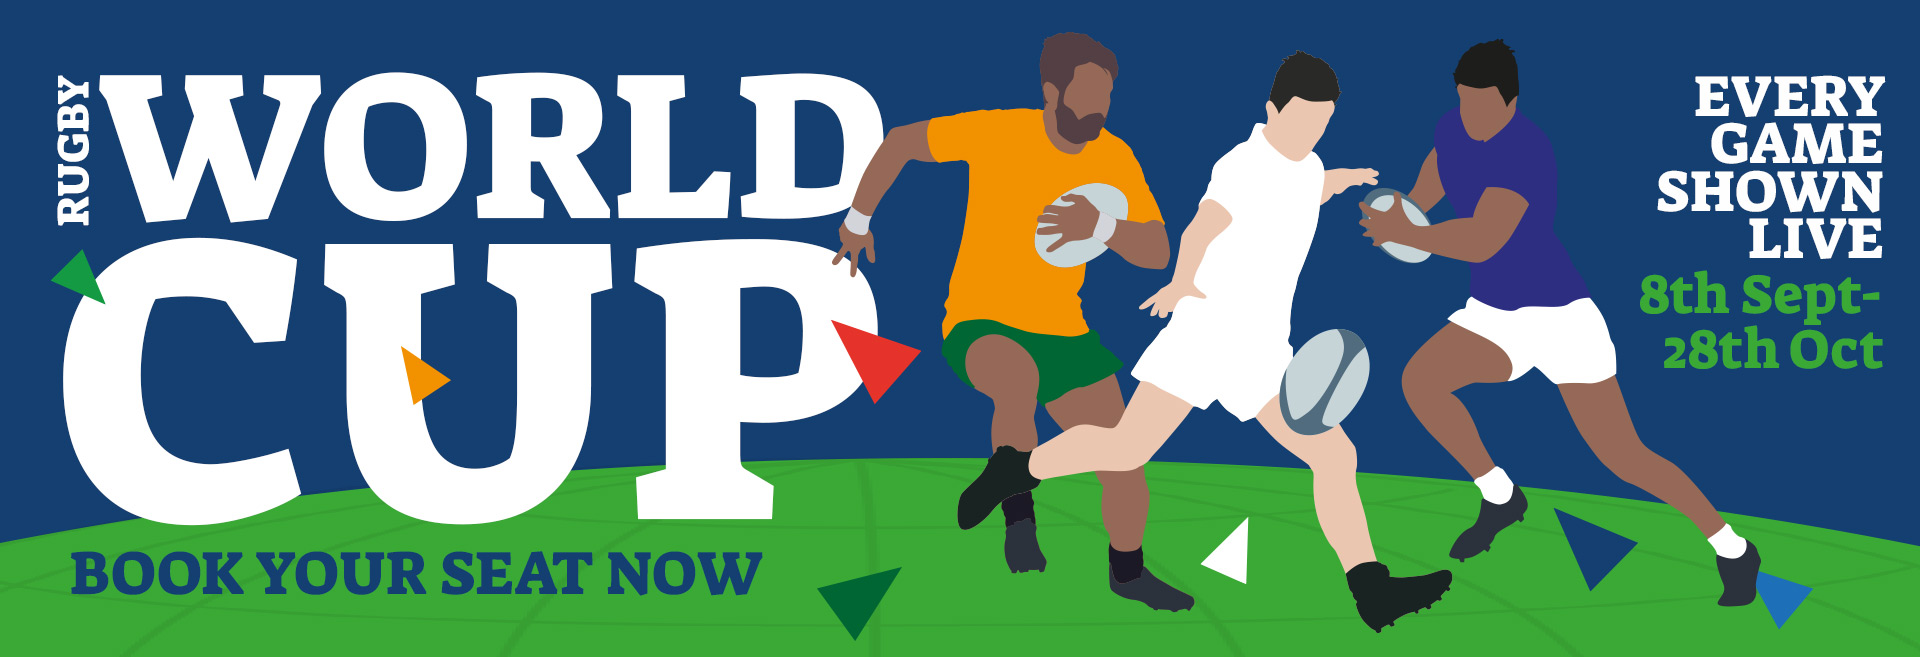 Watch the Rugby World Cup at The Alwyne Castle